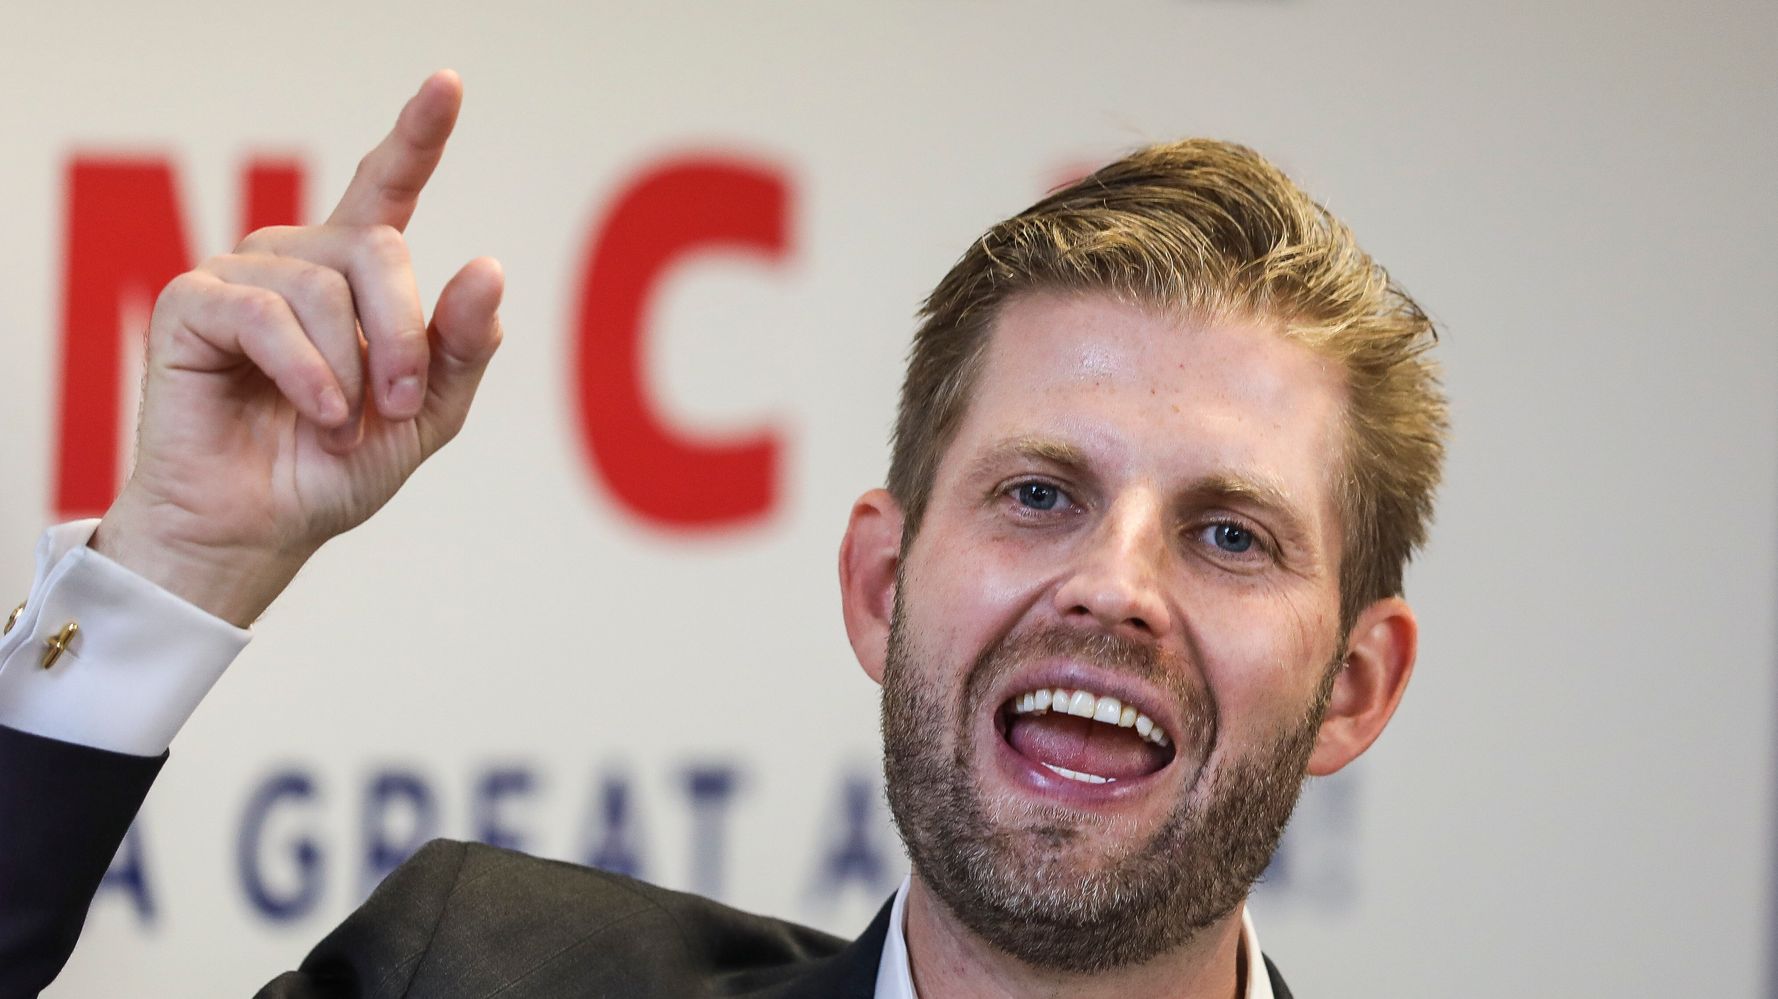 Eric Trump To Be Keynote Speaker At Conference Led By Prominent Anti-Vaxxers